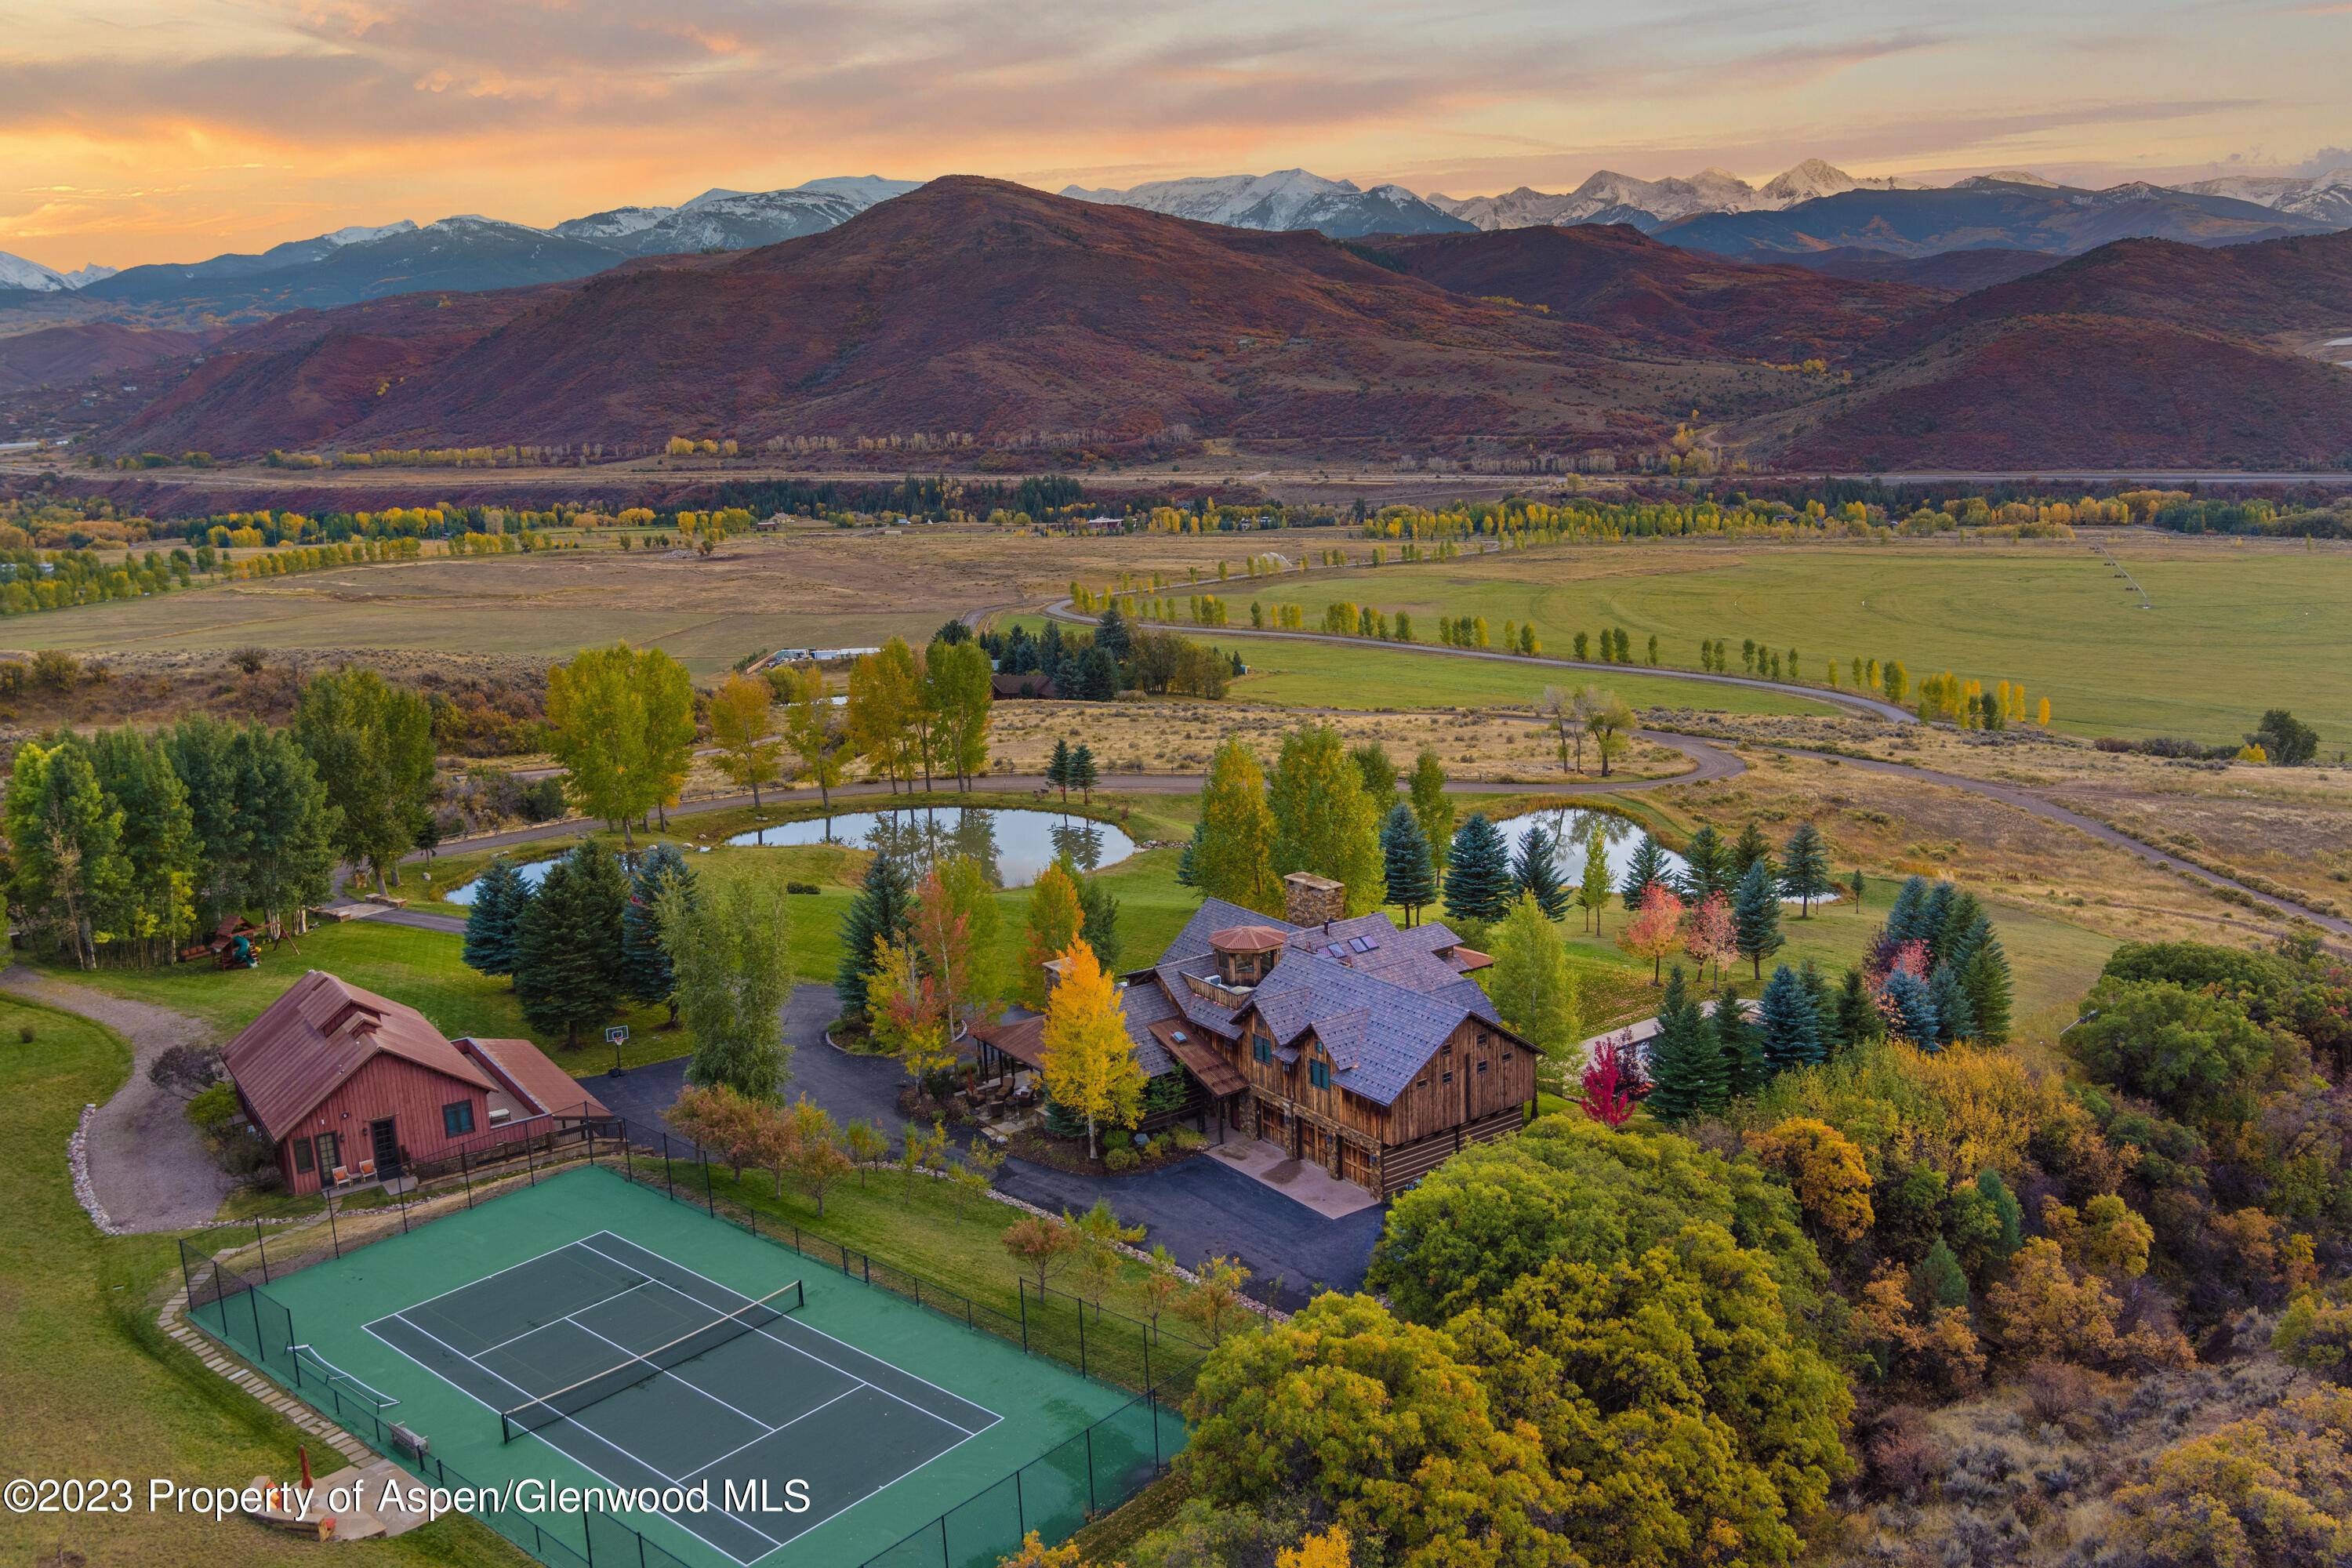 725 Aspen Valley Downs combines mountain elegance, breathtaking views, and exceptional amenities.